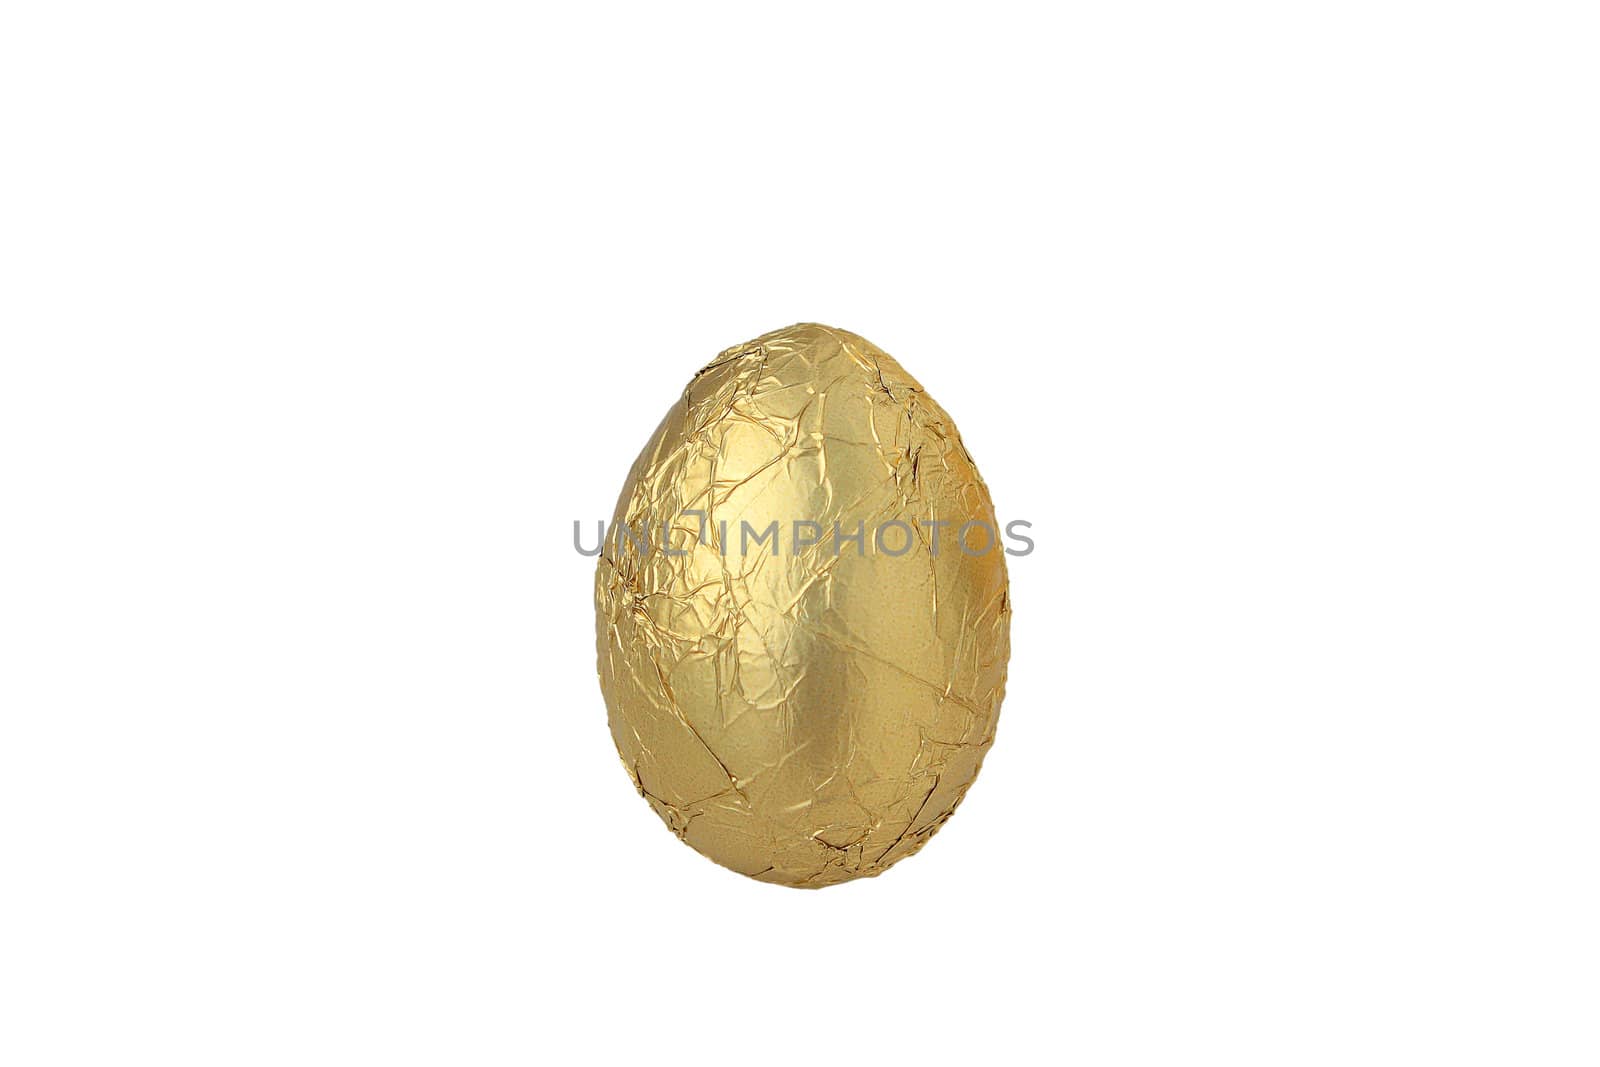 Egg in gold foil - isolated decorative handmade object






http://www.mostphotos.com/4862265/egg-in-gold-foil-isolated-object